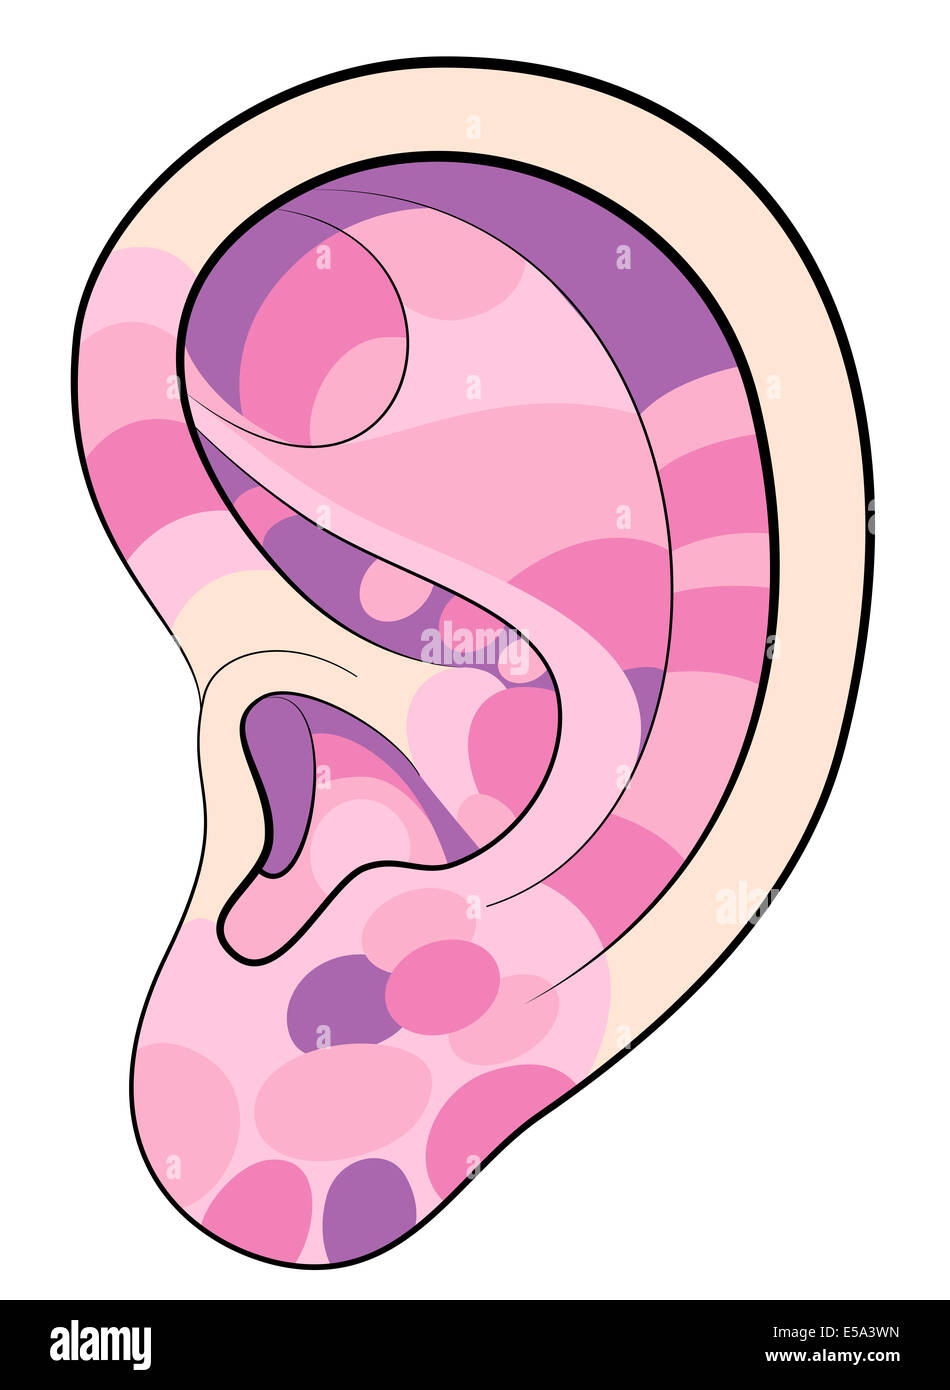 Ear reflexology illustration with different pink colors concerning the corresponding internal organs and body parts. Stock Photo